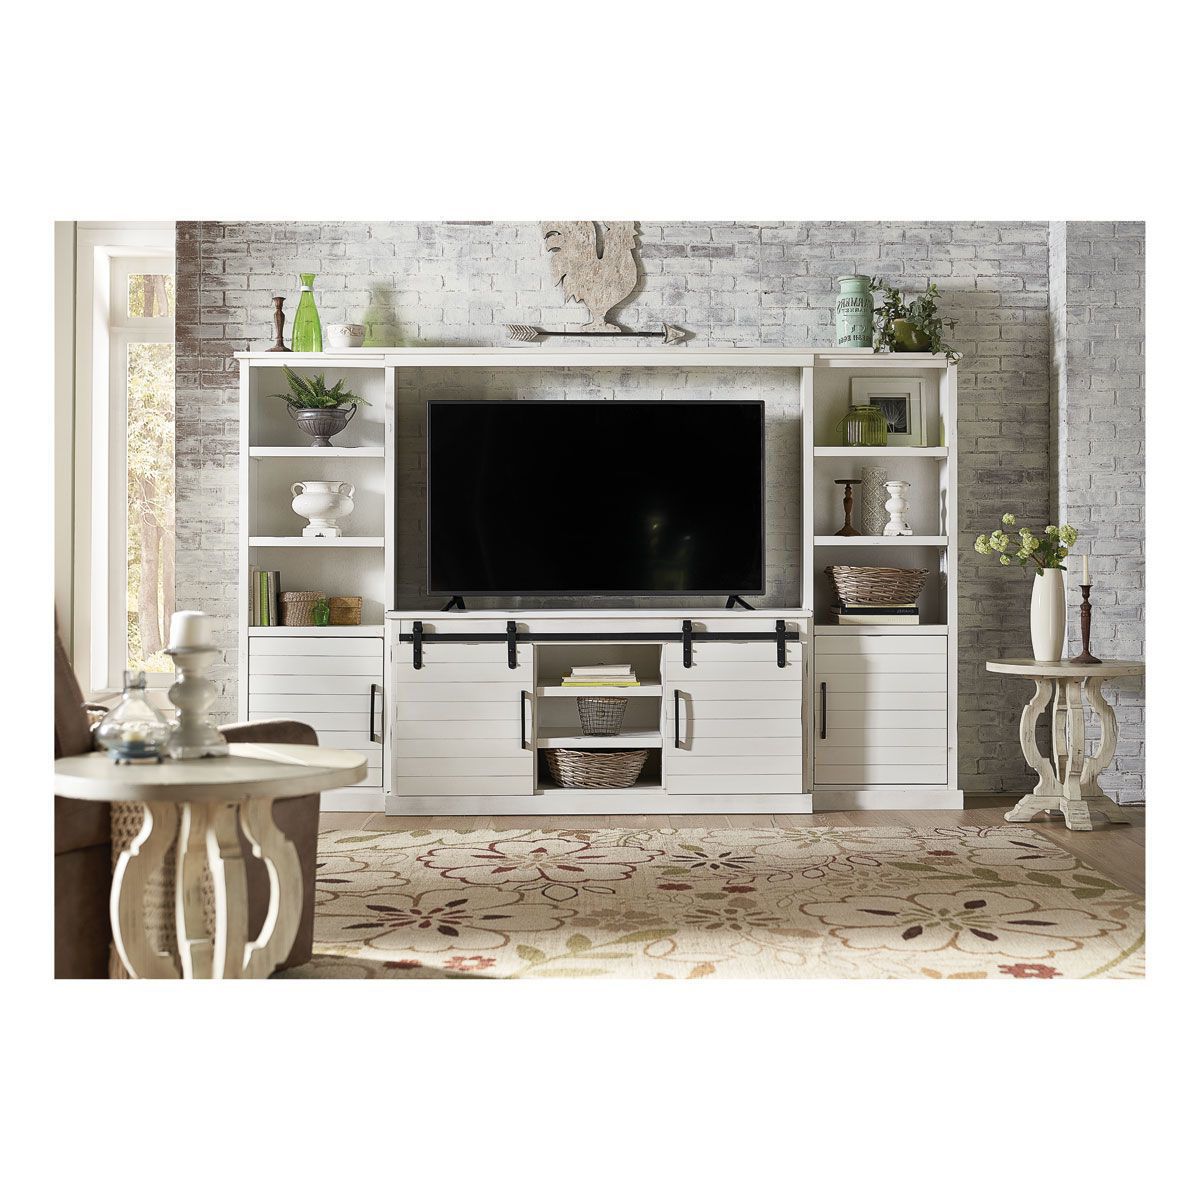 Farmhouse White 4 Piece Entertainment Center | Badcock Home Furniture &more With Regard To White Tv Stands Entertainment Center (Gallery 6 of 20)